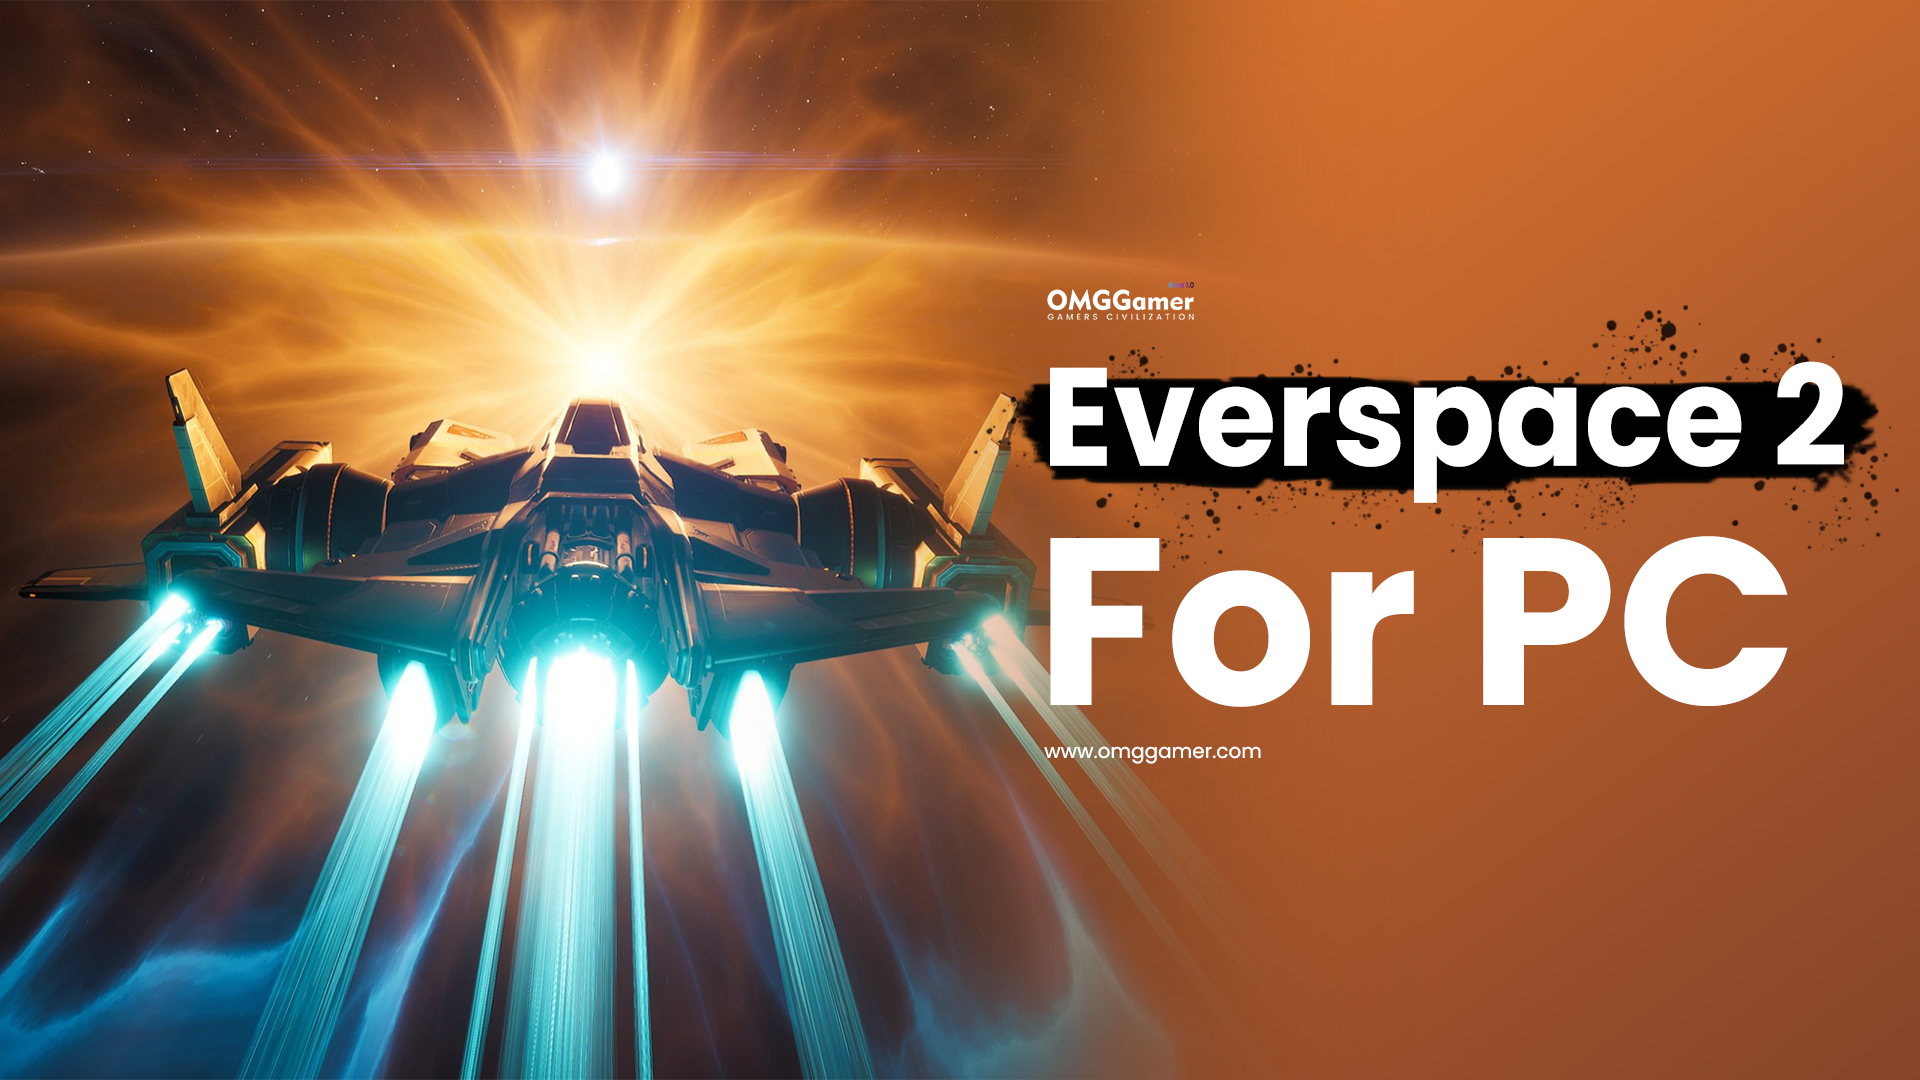 Everspace 2 for PC